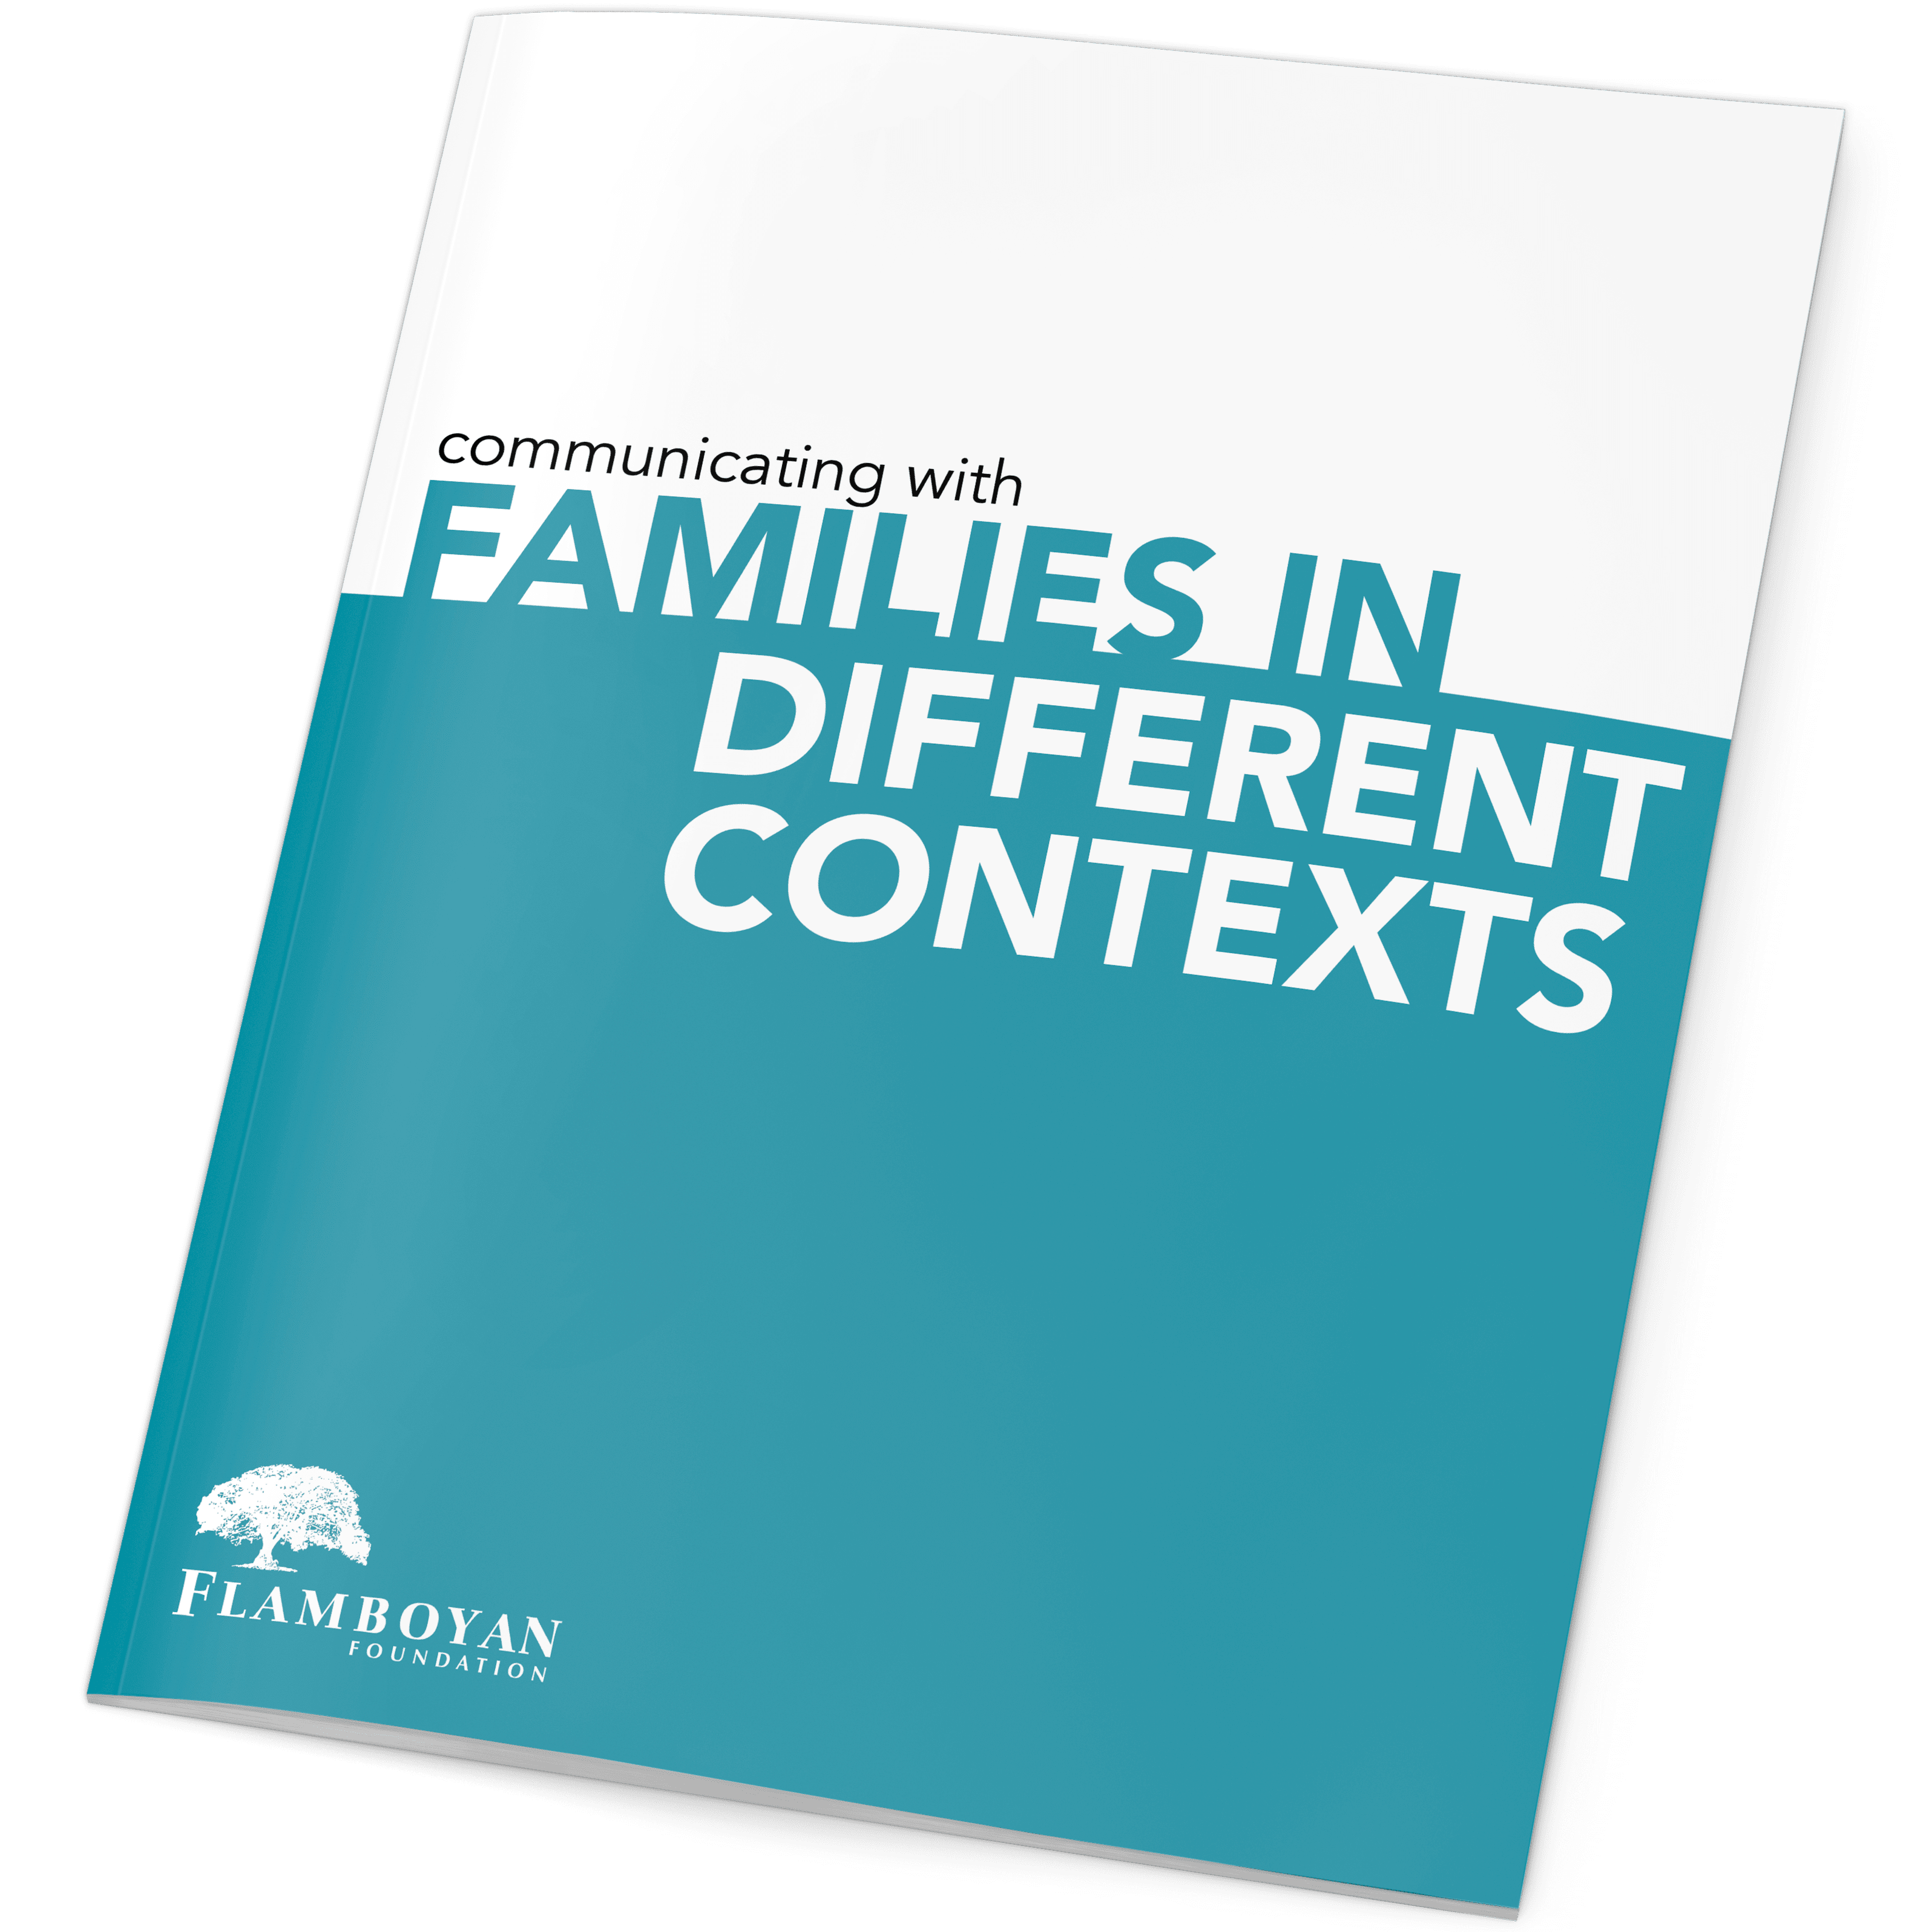 Communicating with Families in Different Contexts by Flamboyan Foundation